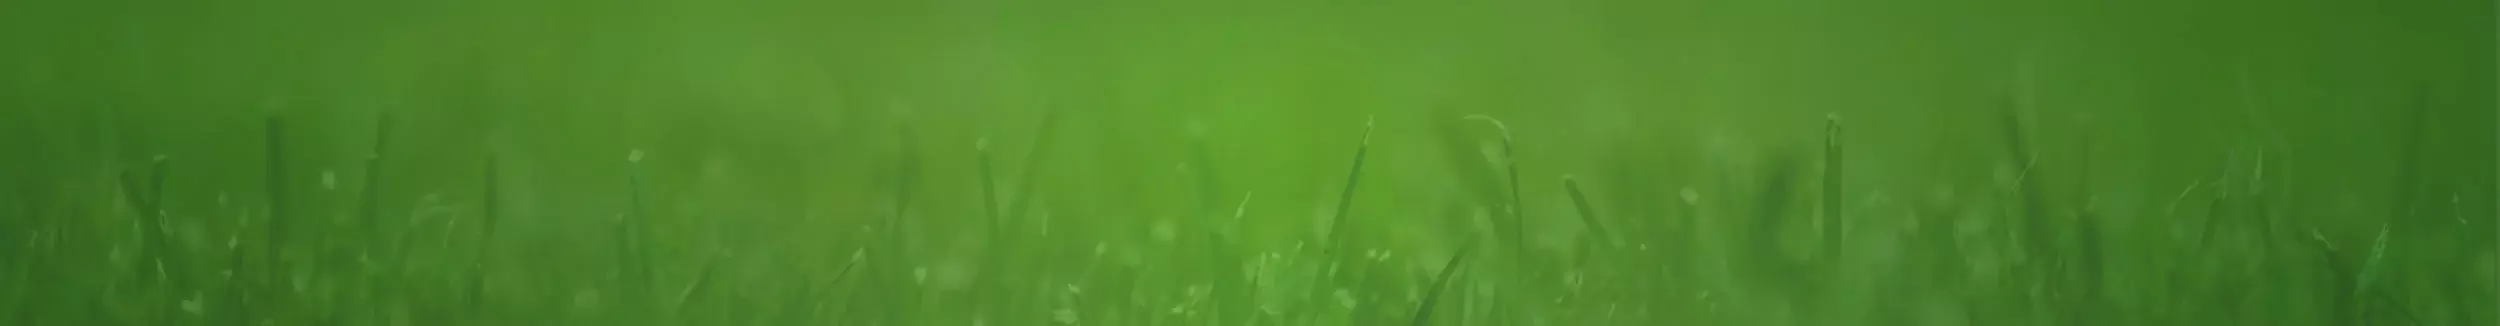 grass with green background